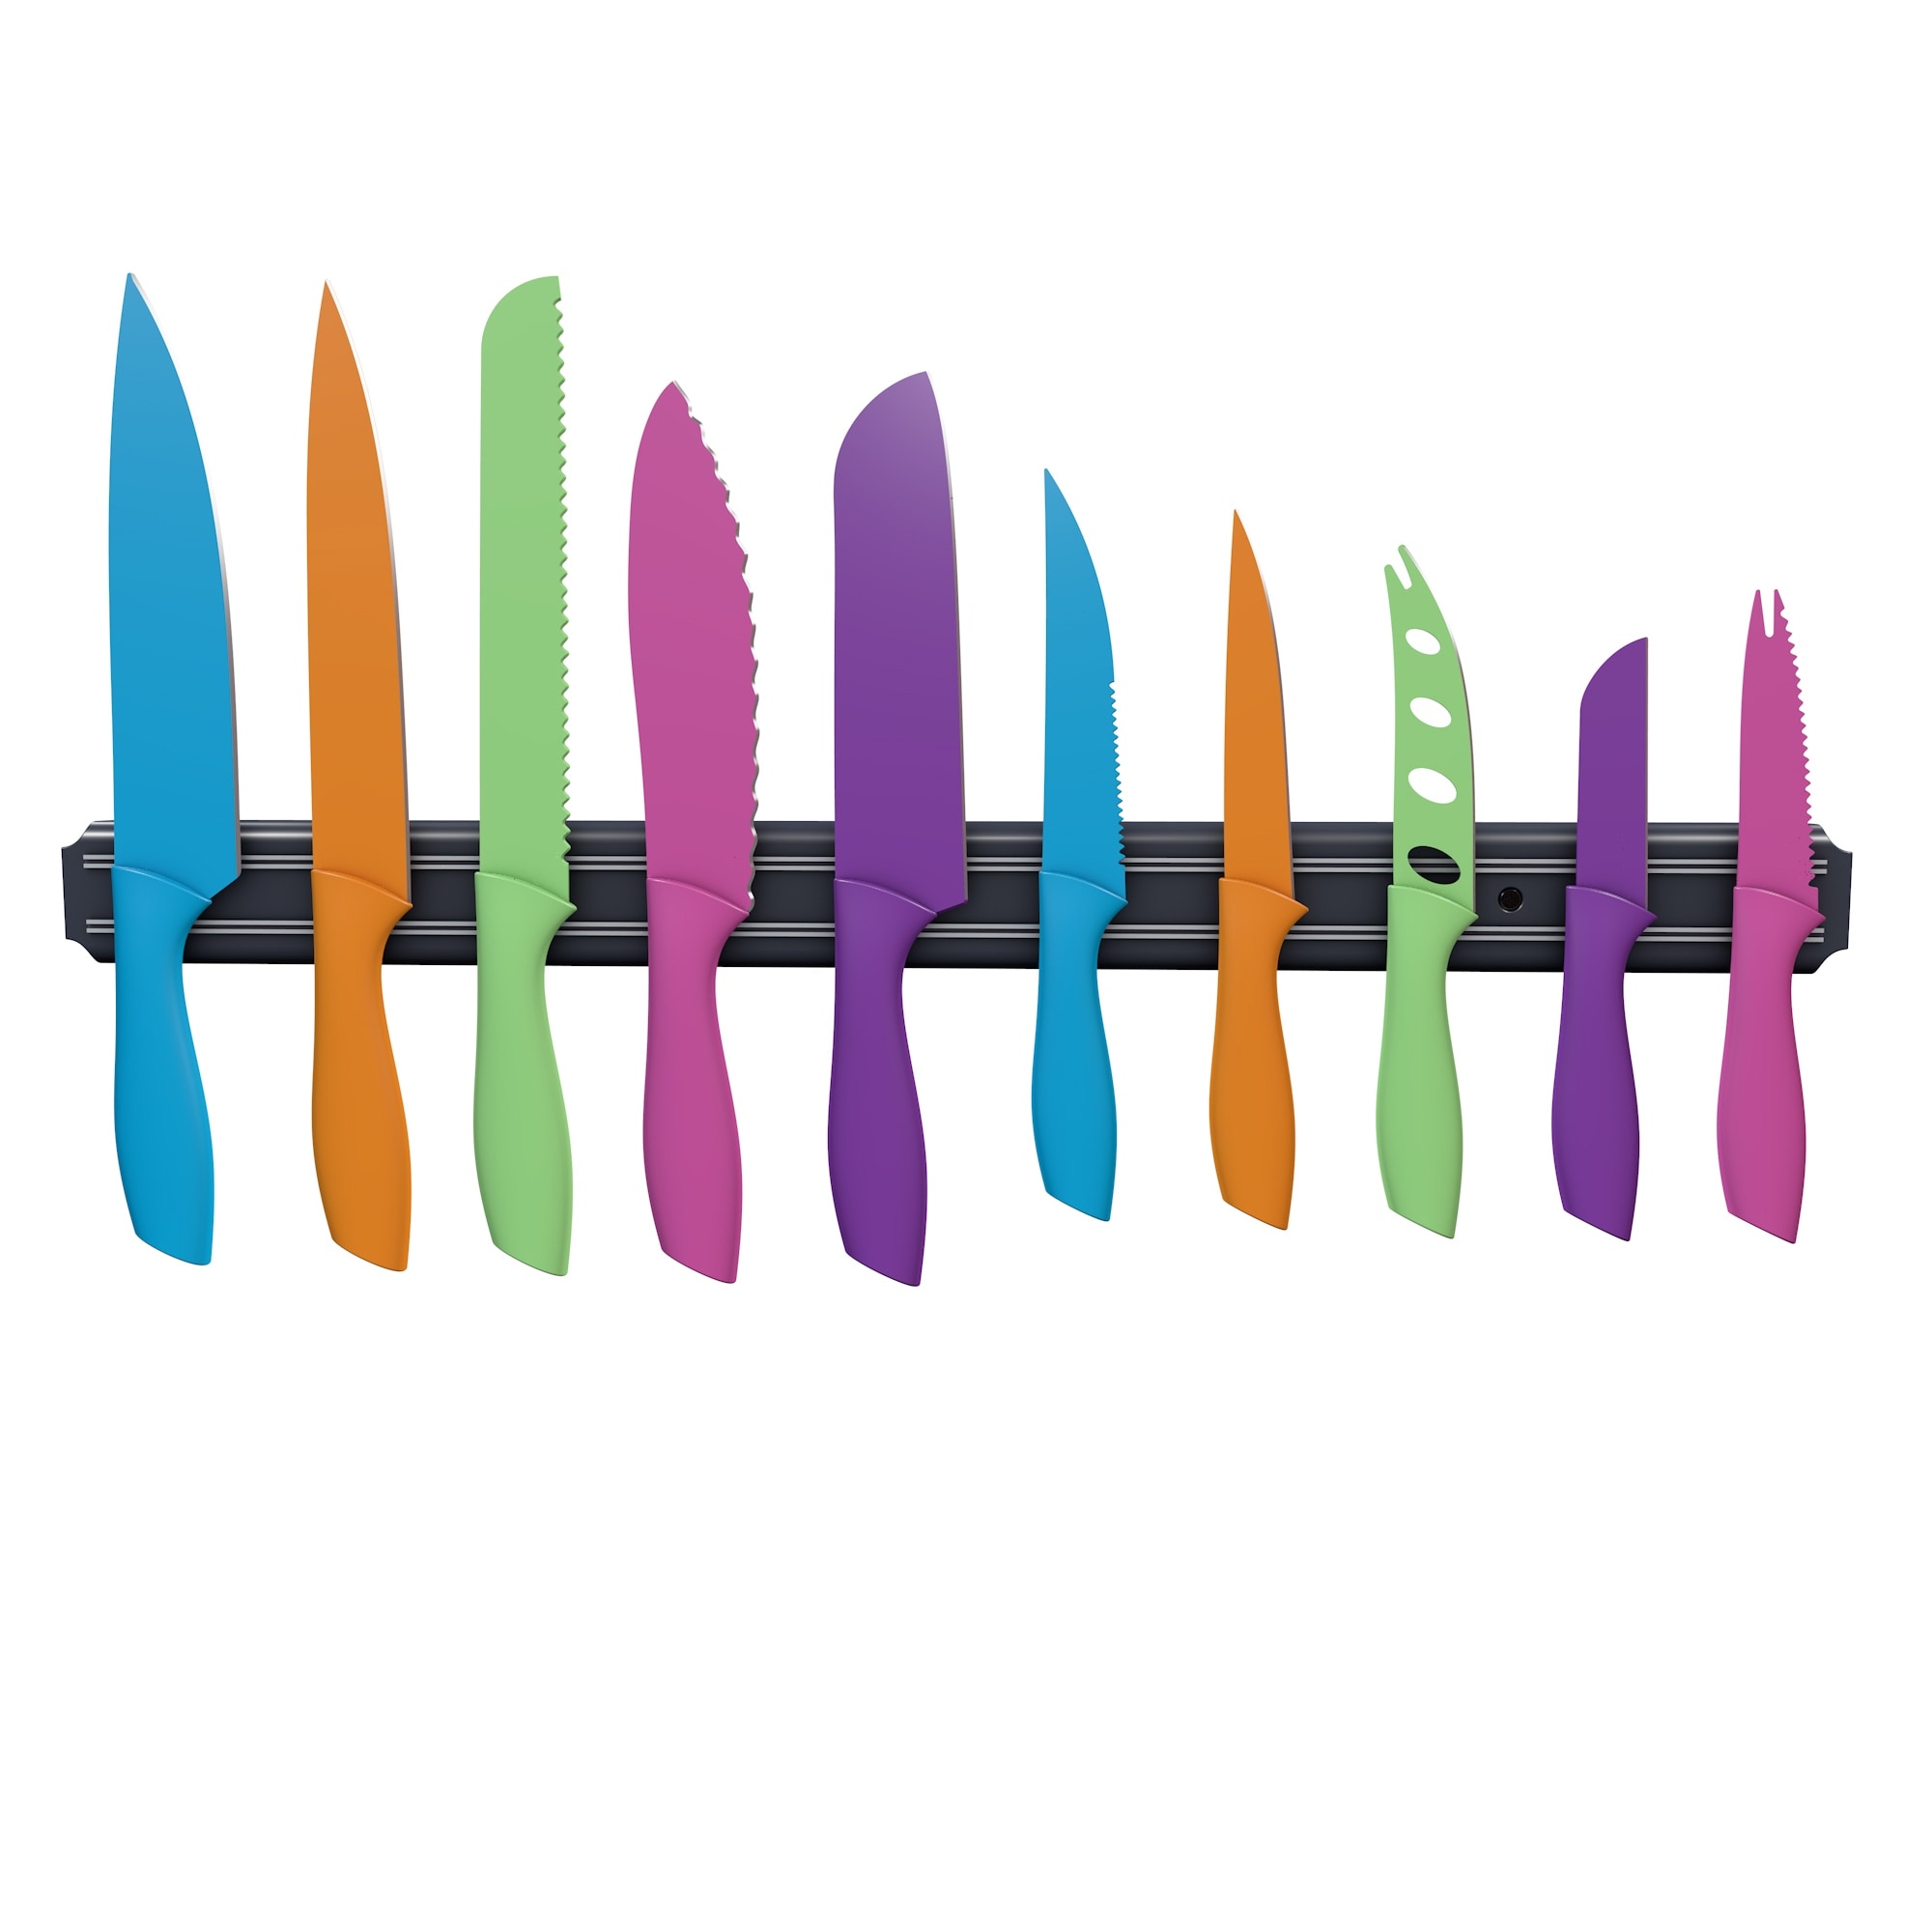 https://ak1.ostkcdn.com/images/products/is/images/direct/988e34e0827b640ef35026fdf02e80e0e4c27abc/Knife-Set---Colorful-10-Piece-Stainless-Steel-Cutting-Knives-with-21.5-Inch-Long-Magnetic-Knife-Holder-by-Whetsone.jpg